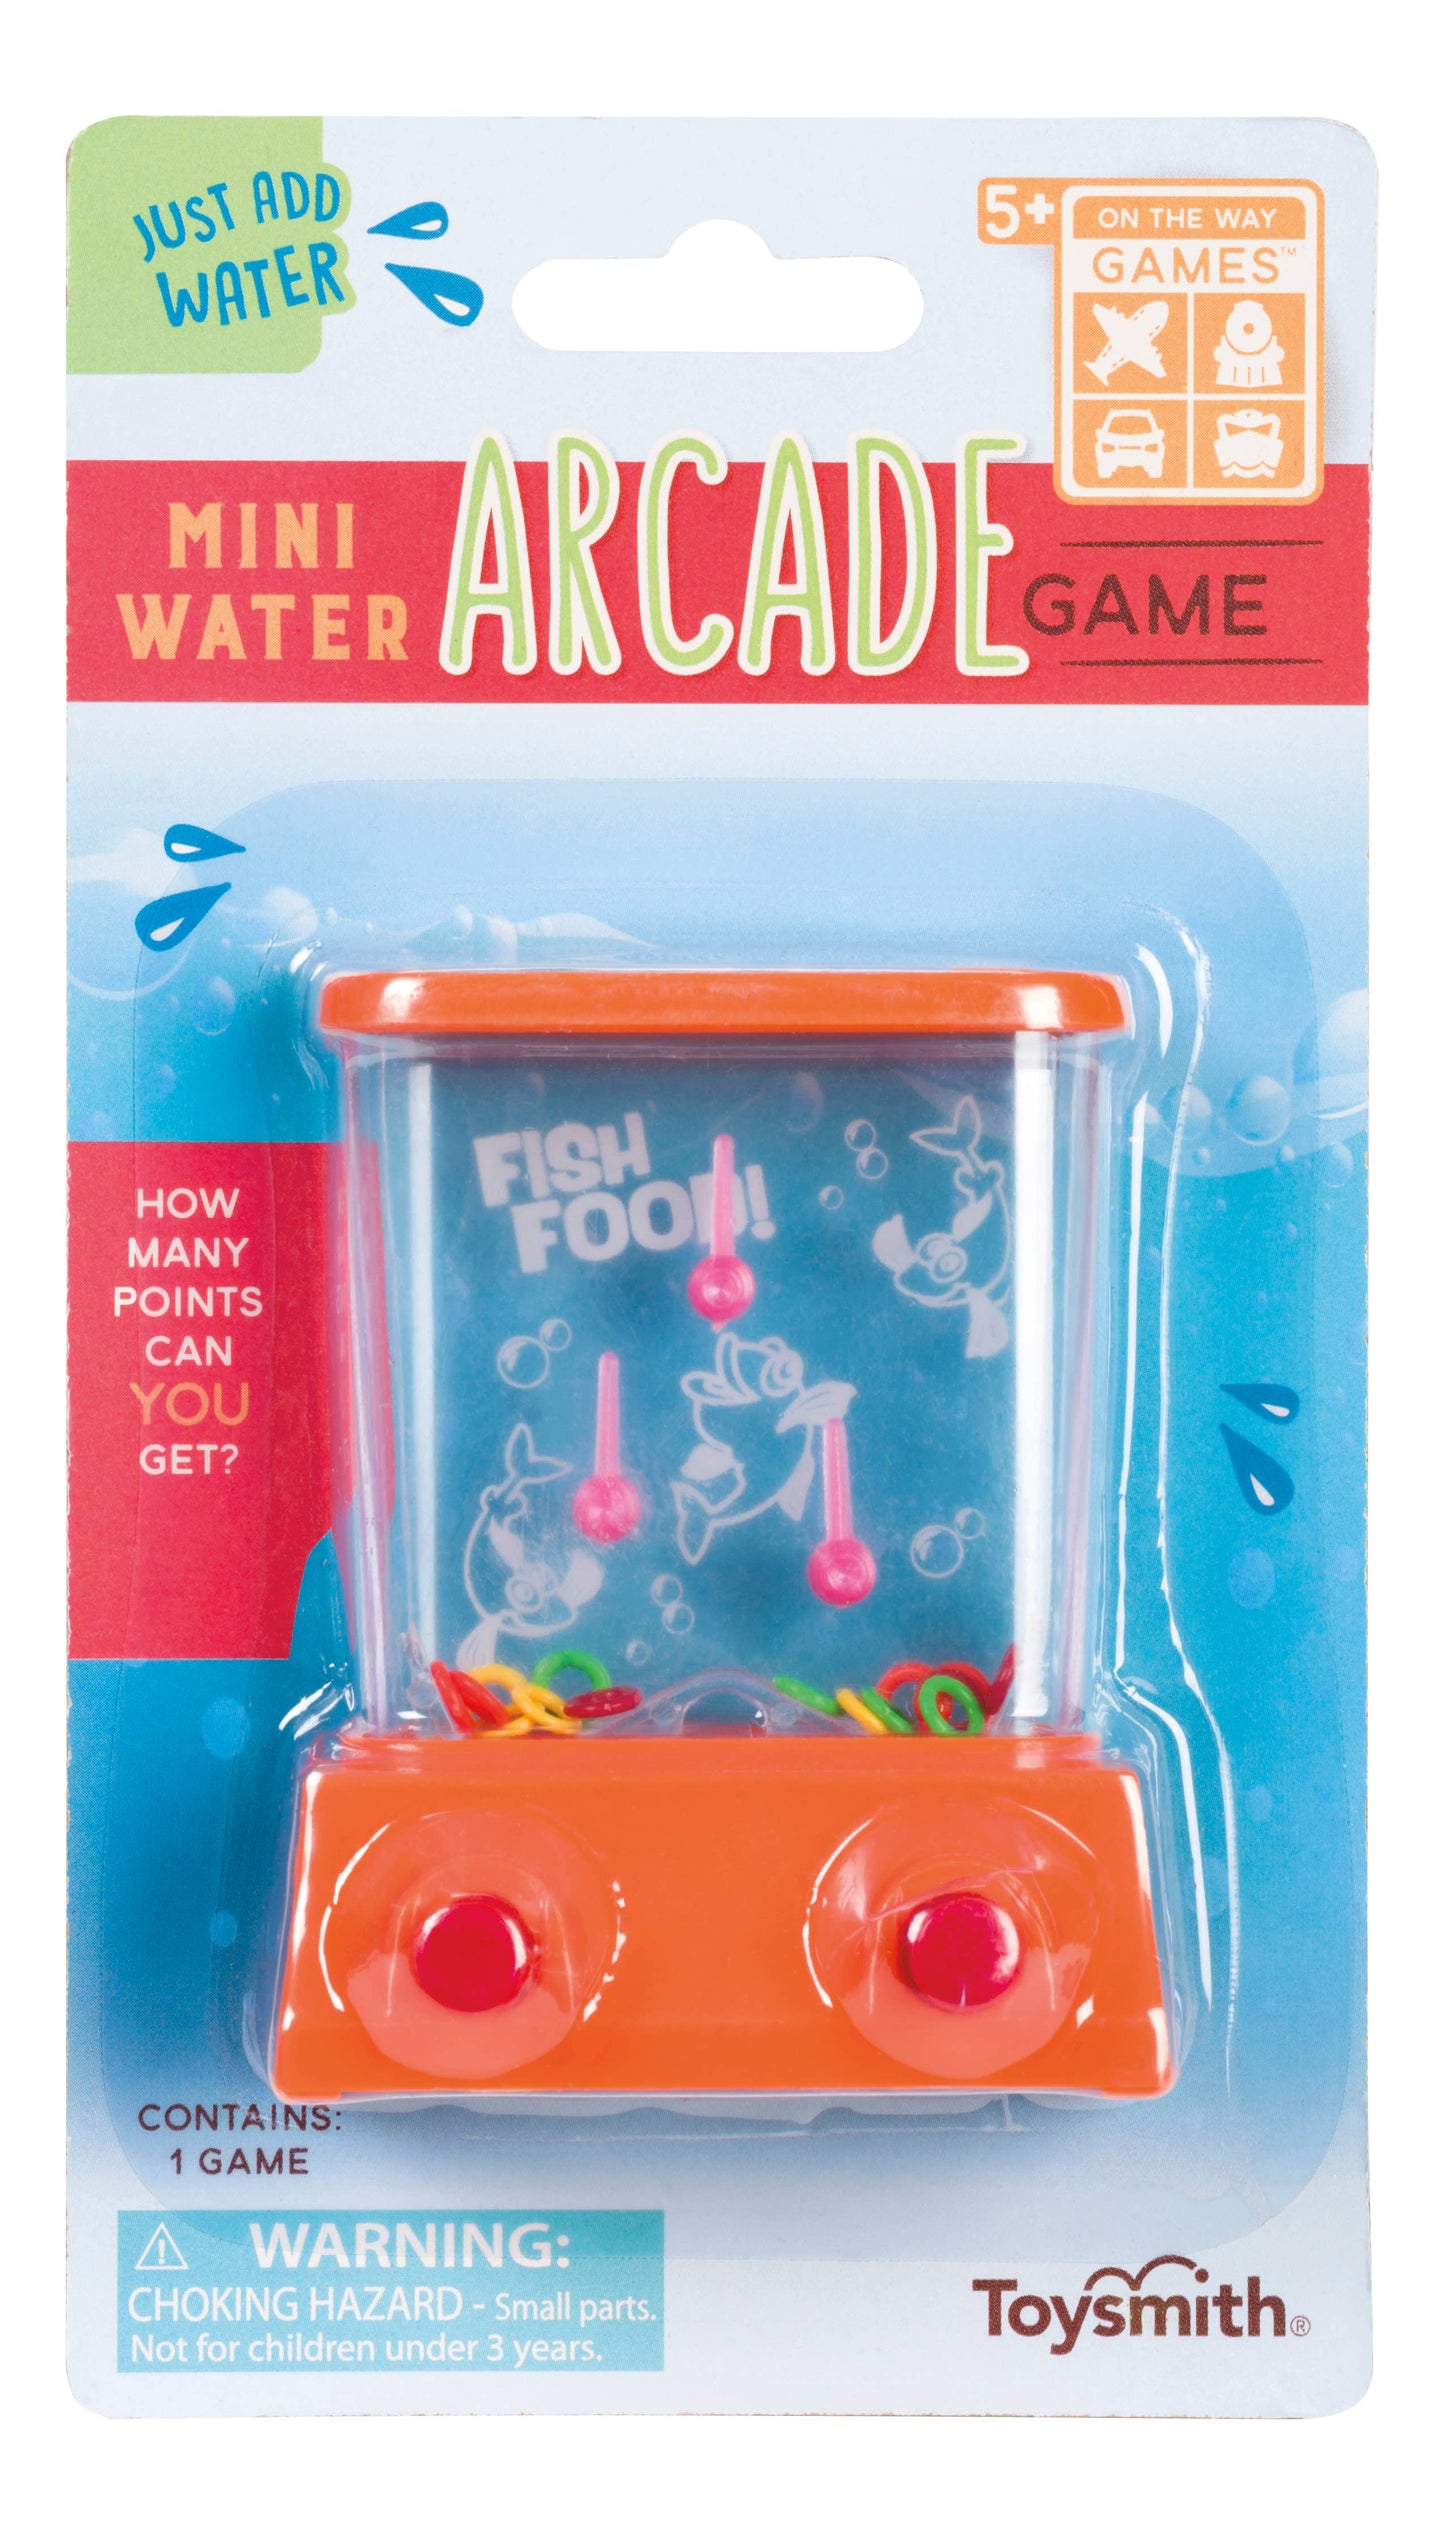 Mini Water Arcade Games, 2 Styles, Travel Size